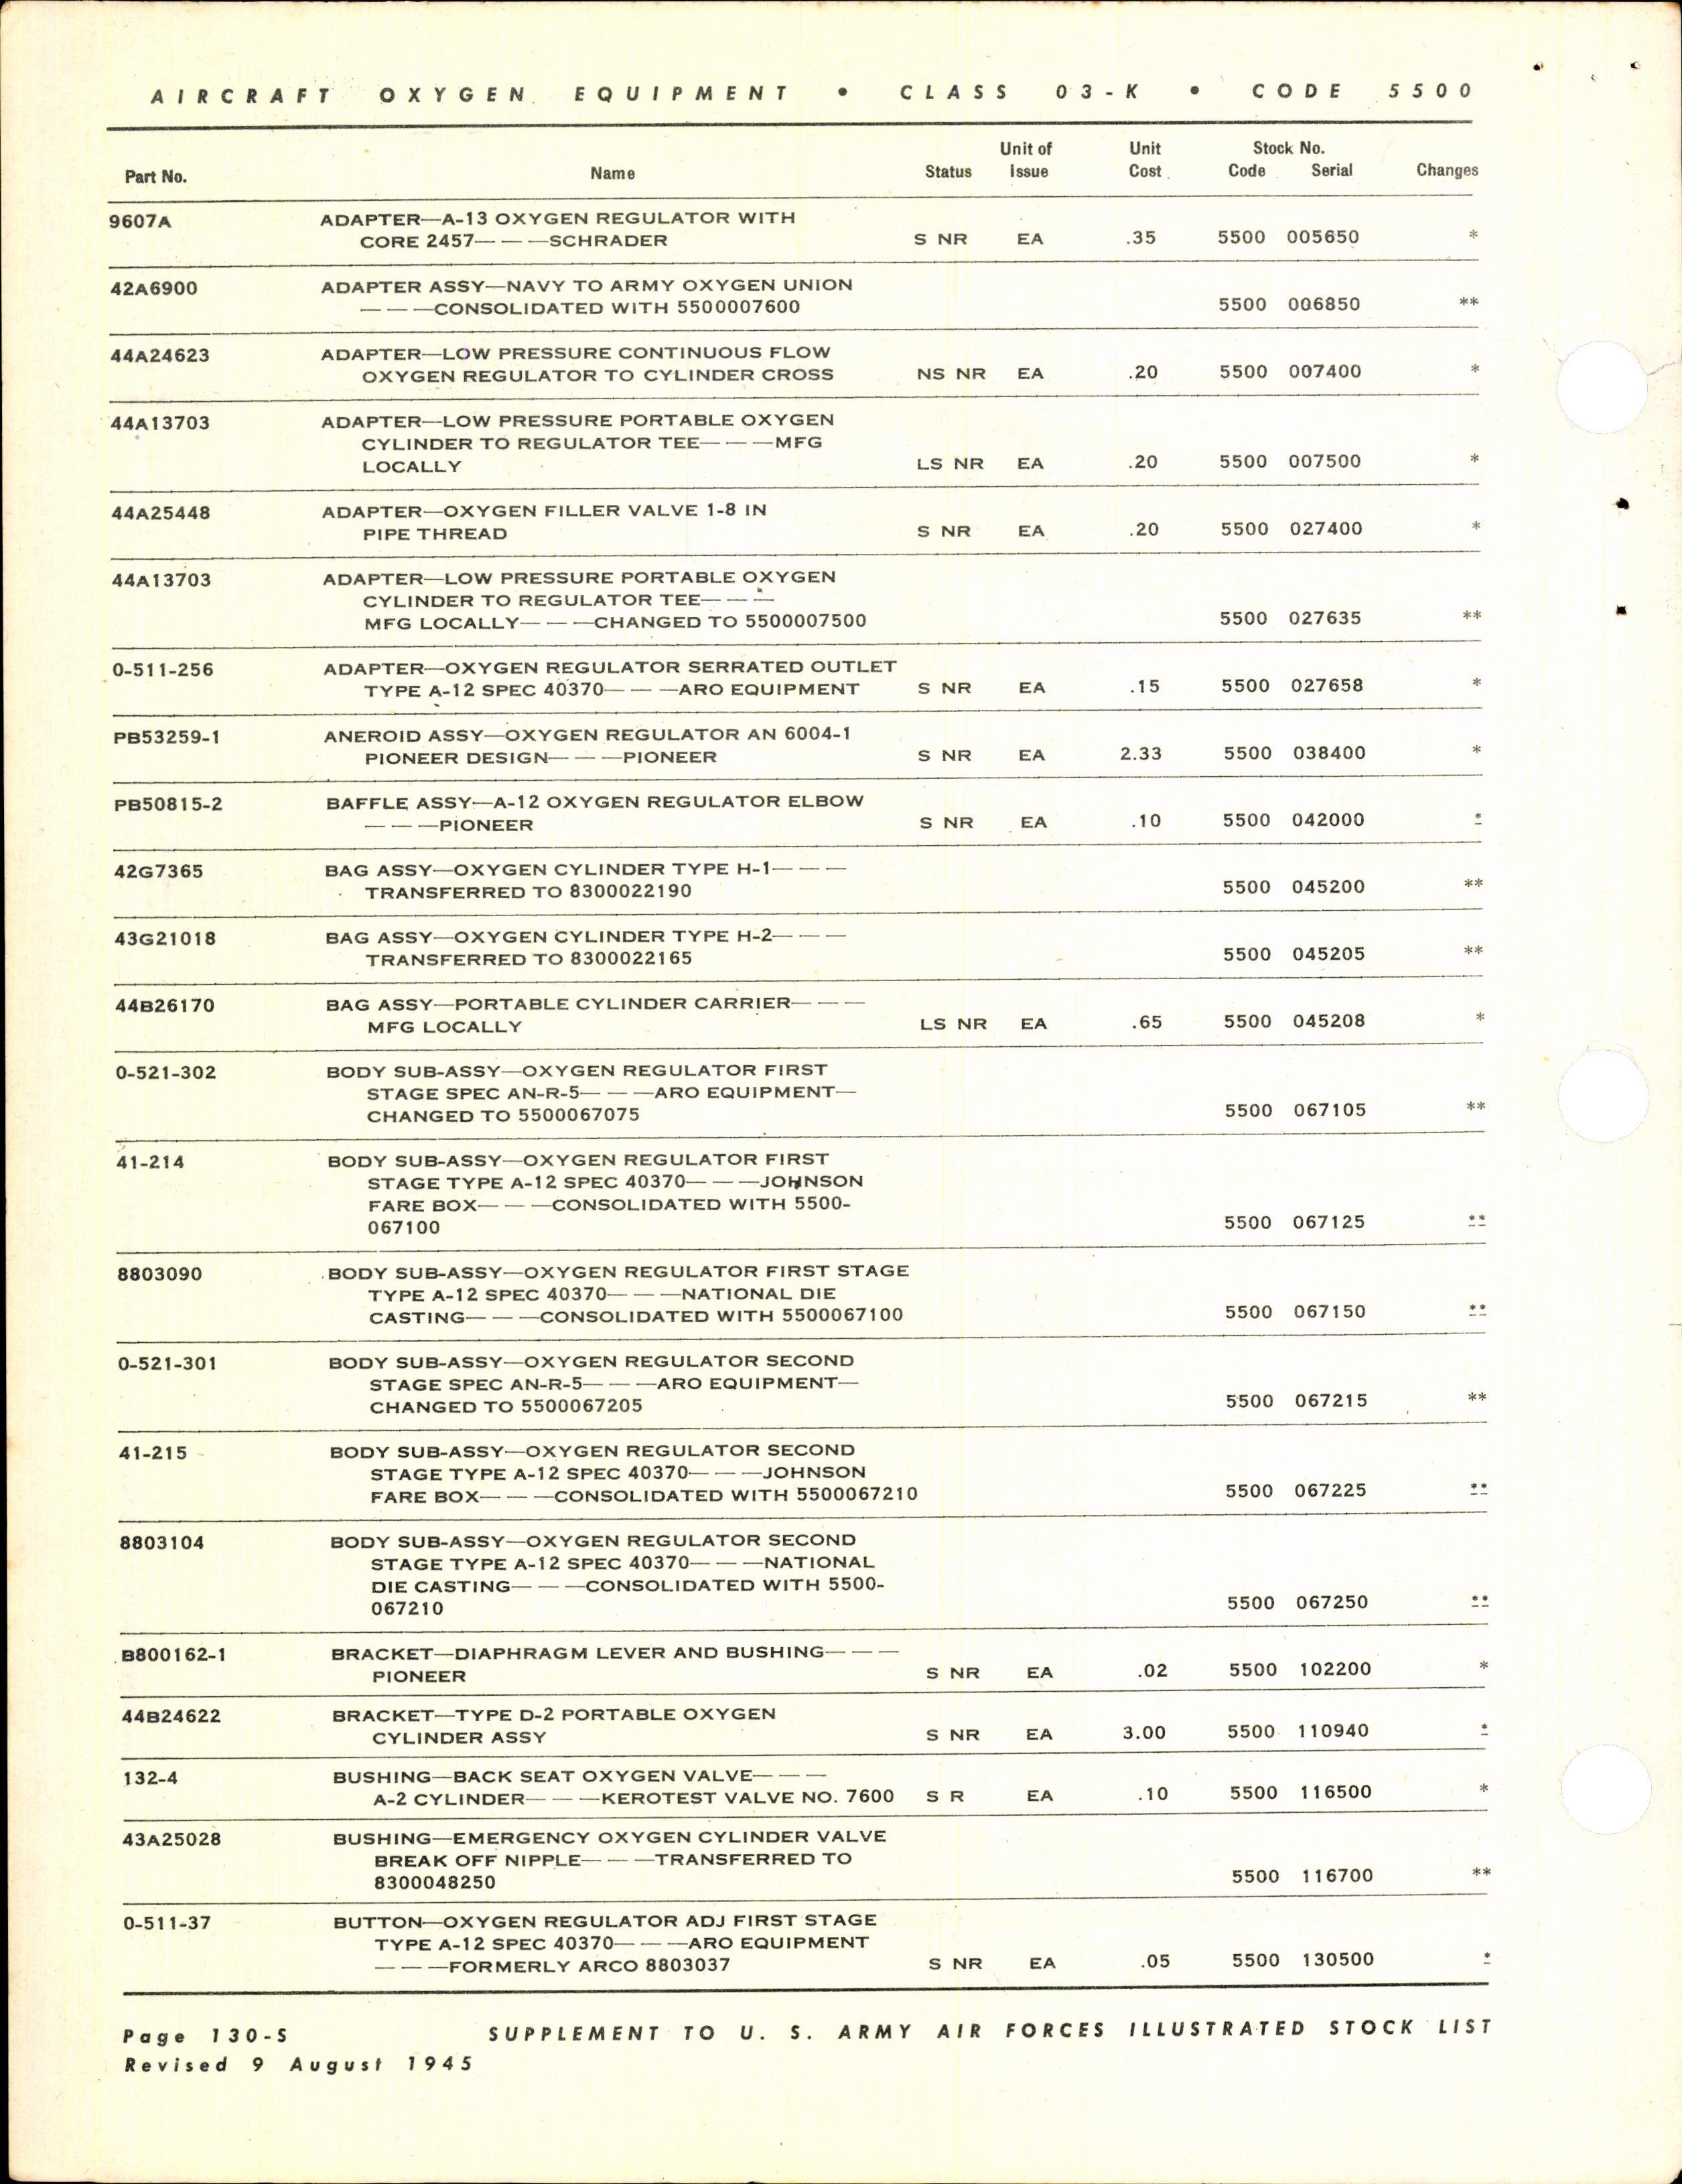 Sample page 8 from AirCorps Library document: Illustrated Stock List for Aircraft Oxygen Equipment